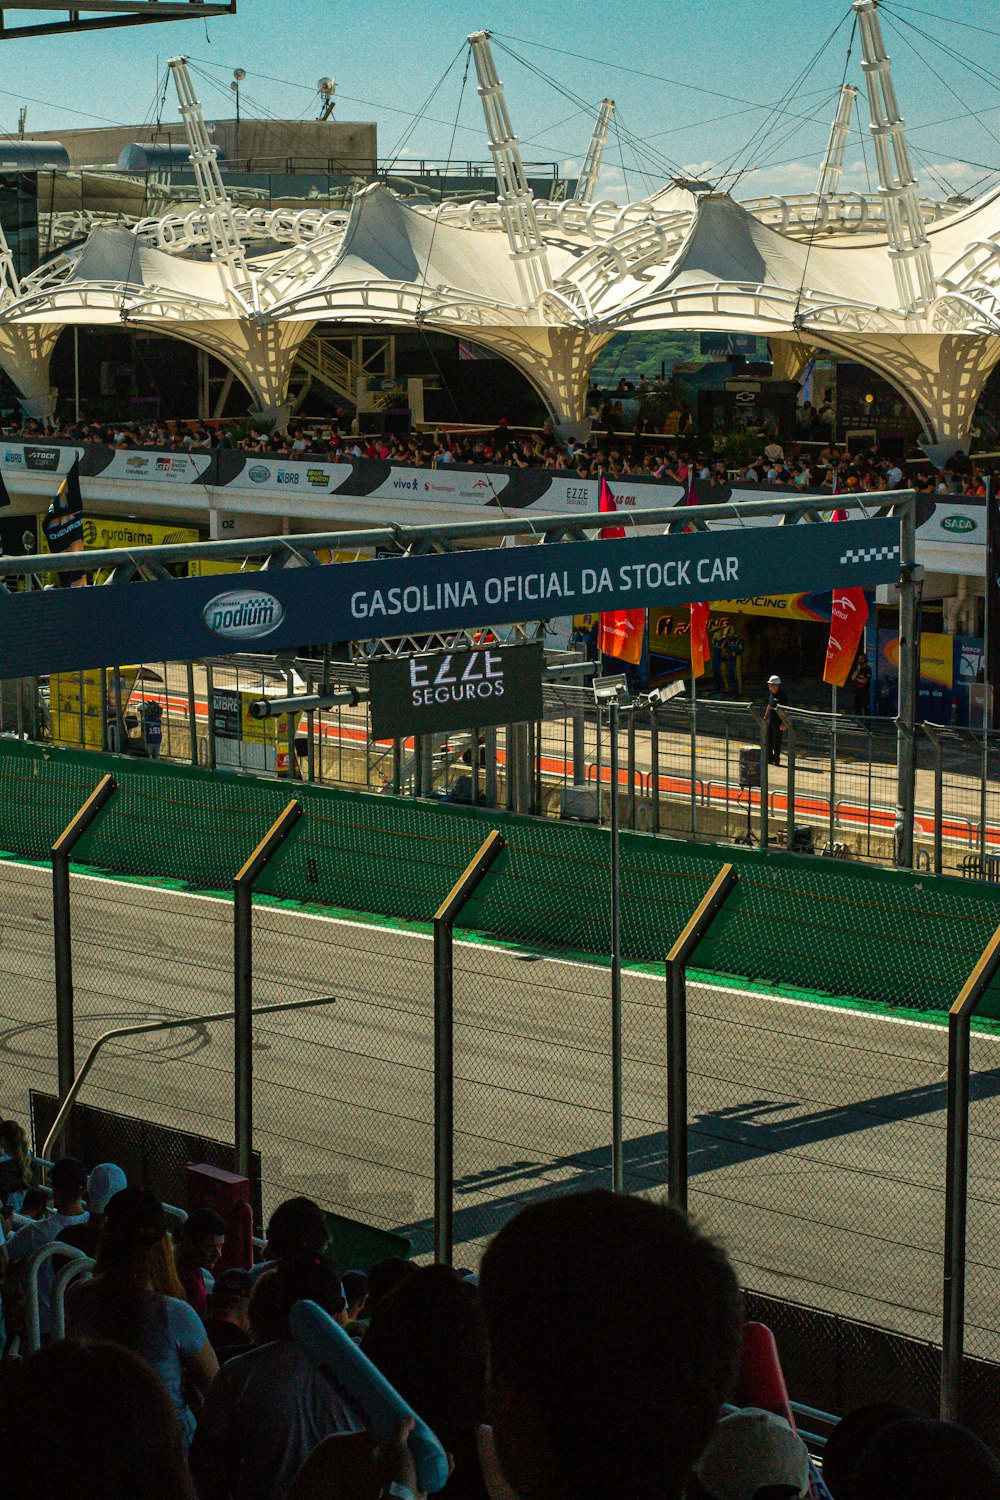 a crowd of people watching a race on a track